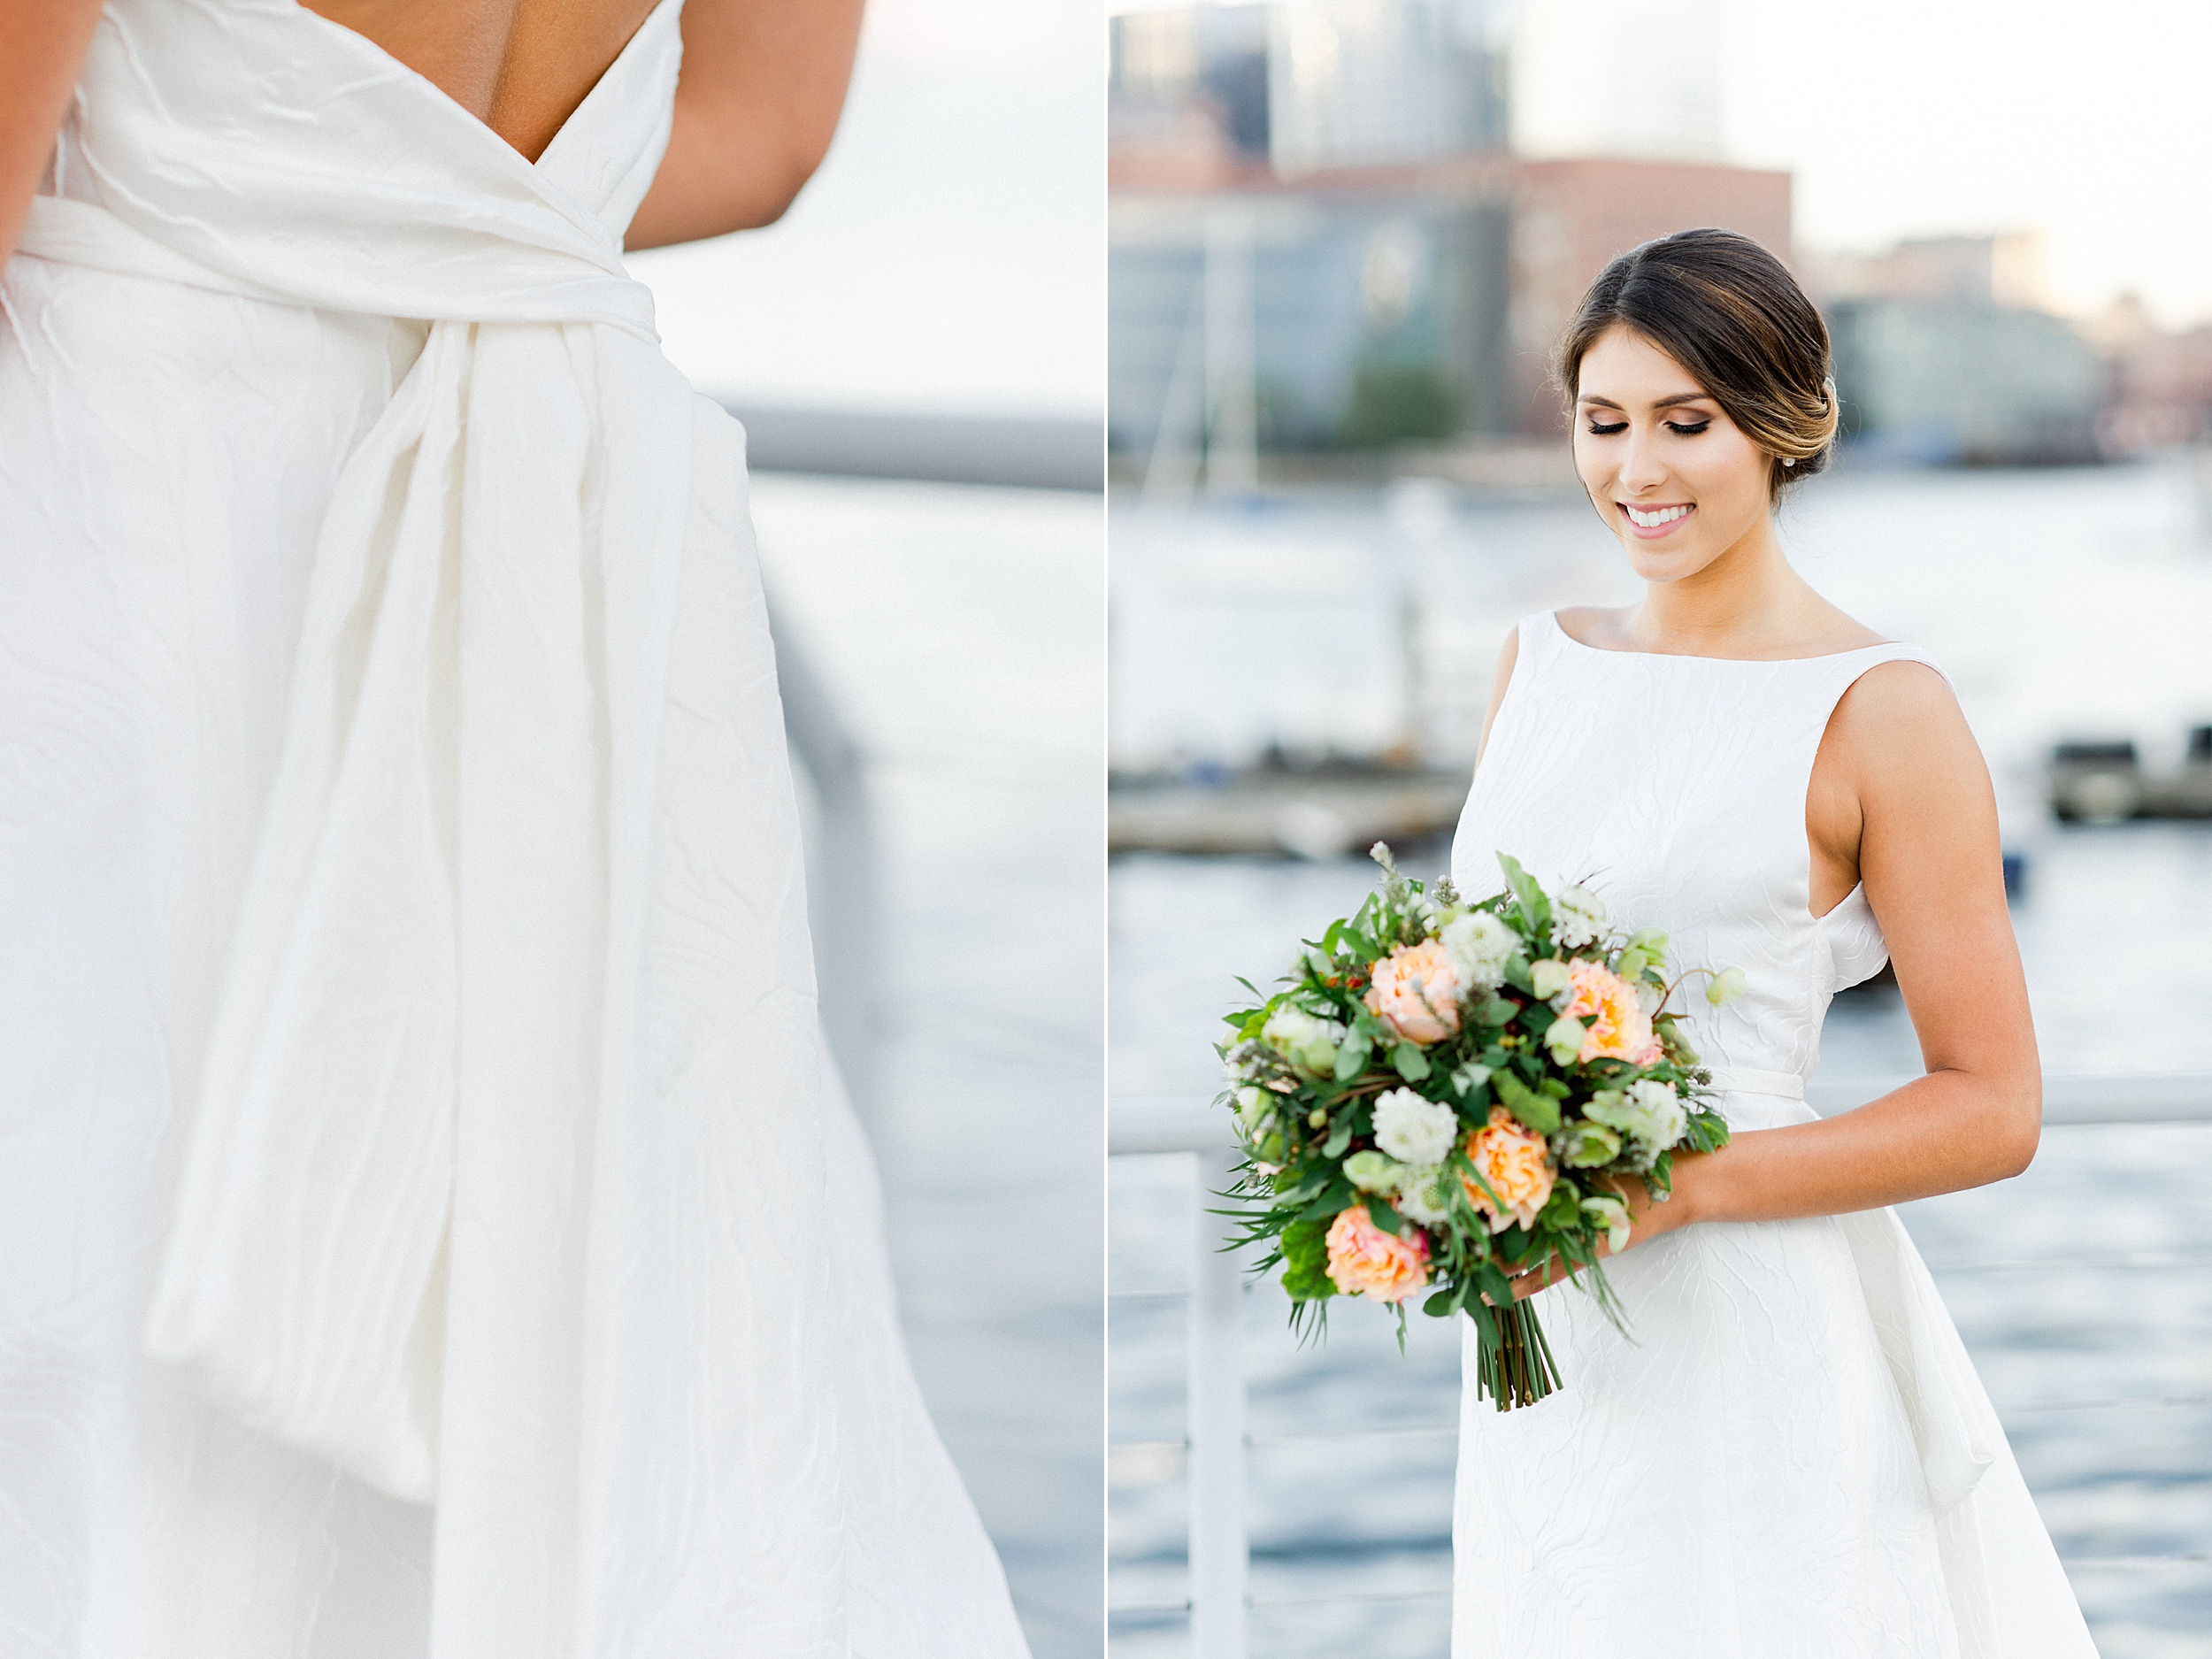 seaside bridal dress and bouquet inspiration in Boston MA